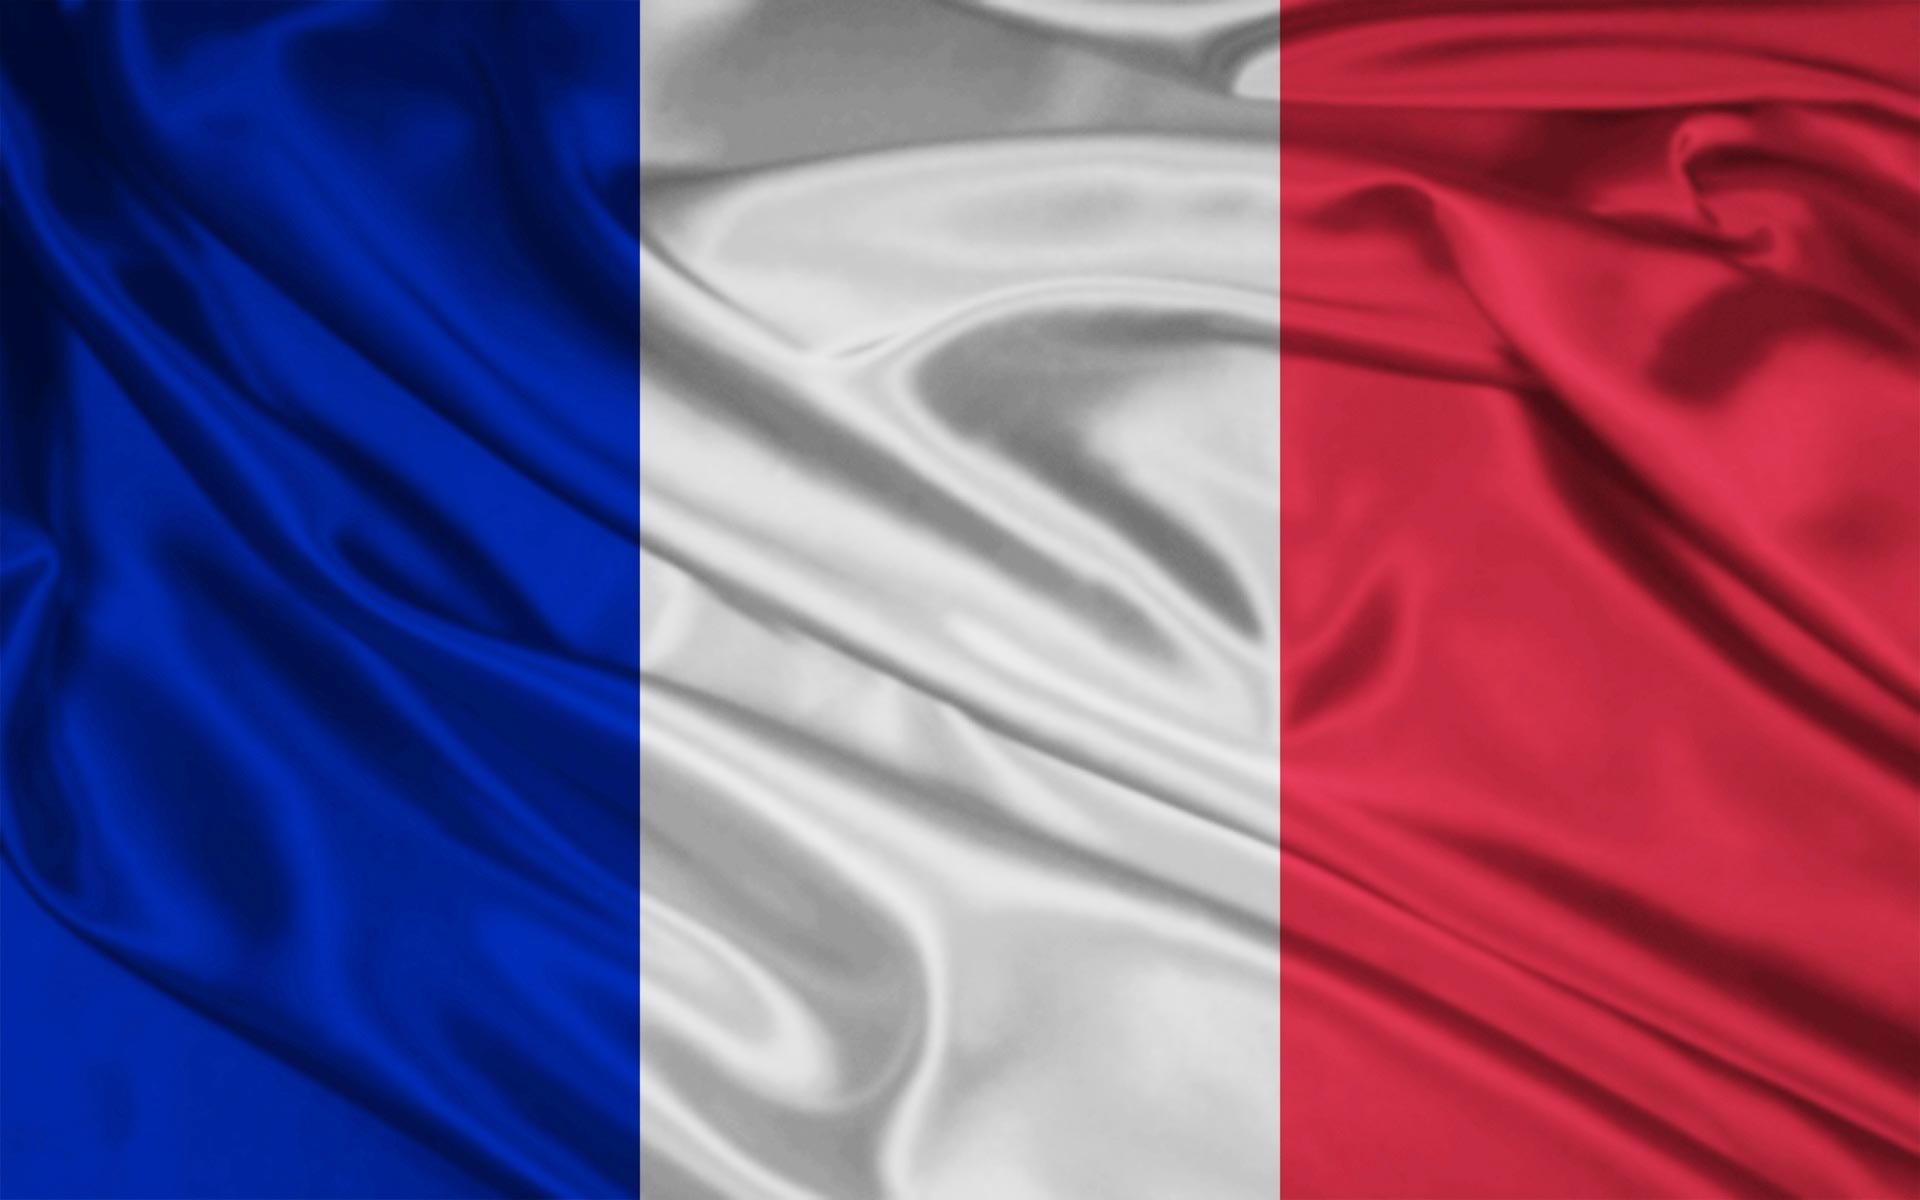  French flag wallpaper   Wallery